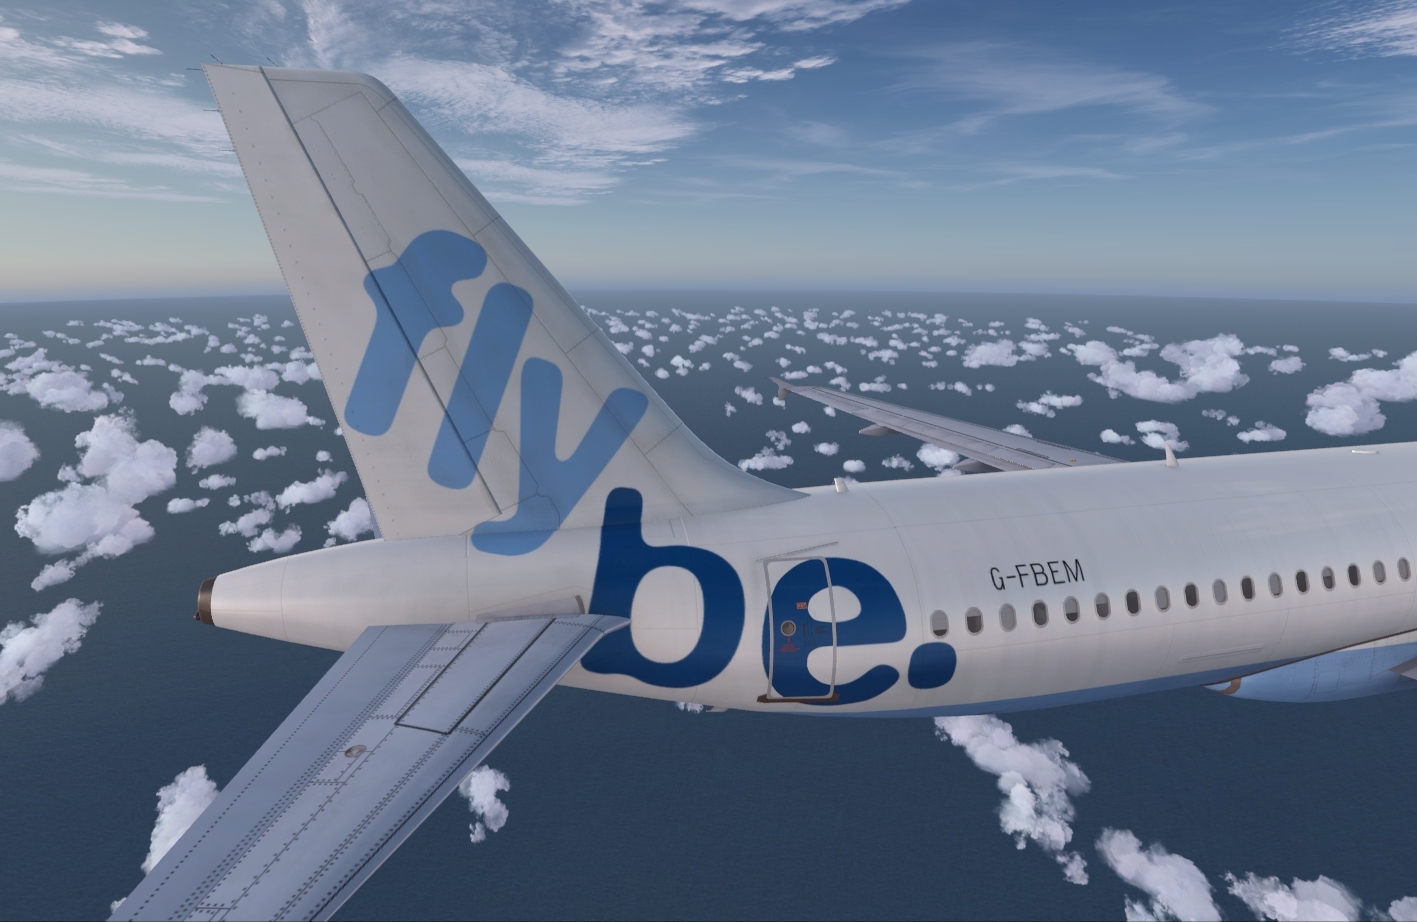 More information about "Flybe A320 CFM G-FBEM"